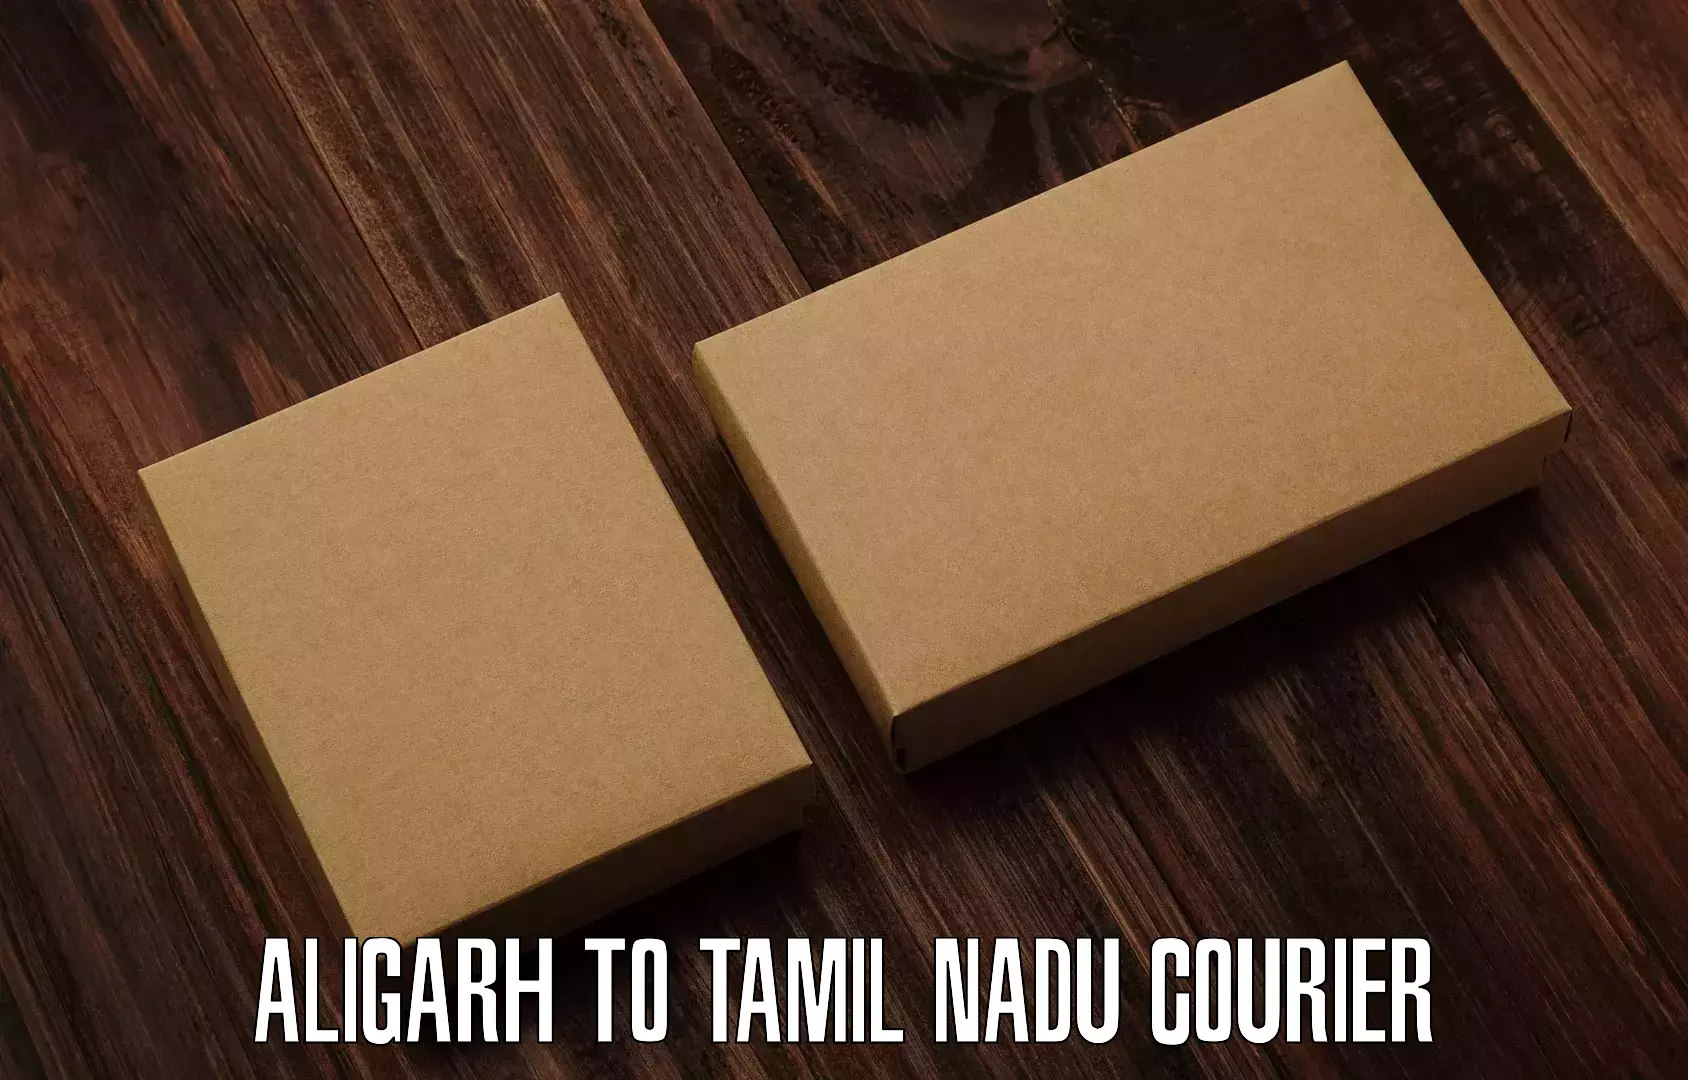 24-hour delivery options Aligarh to Chennai Port